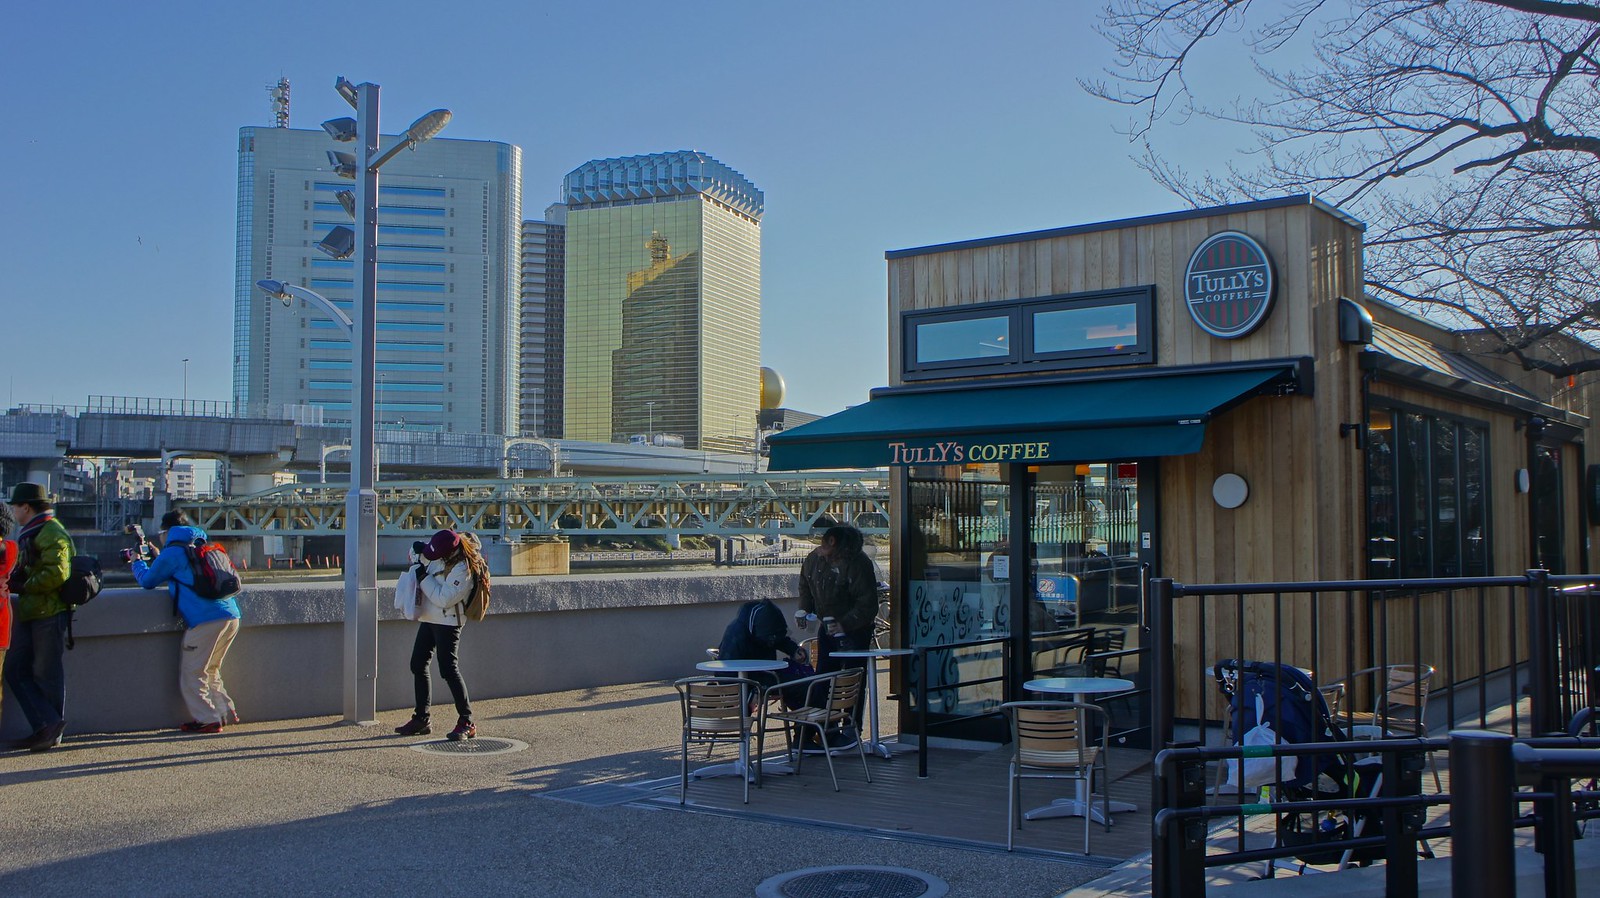 Tully's Cafe by Sumida River